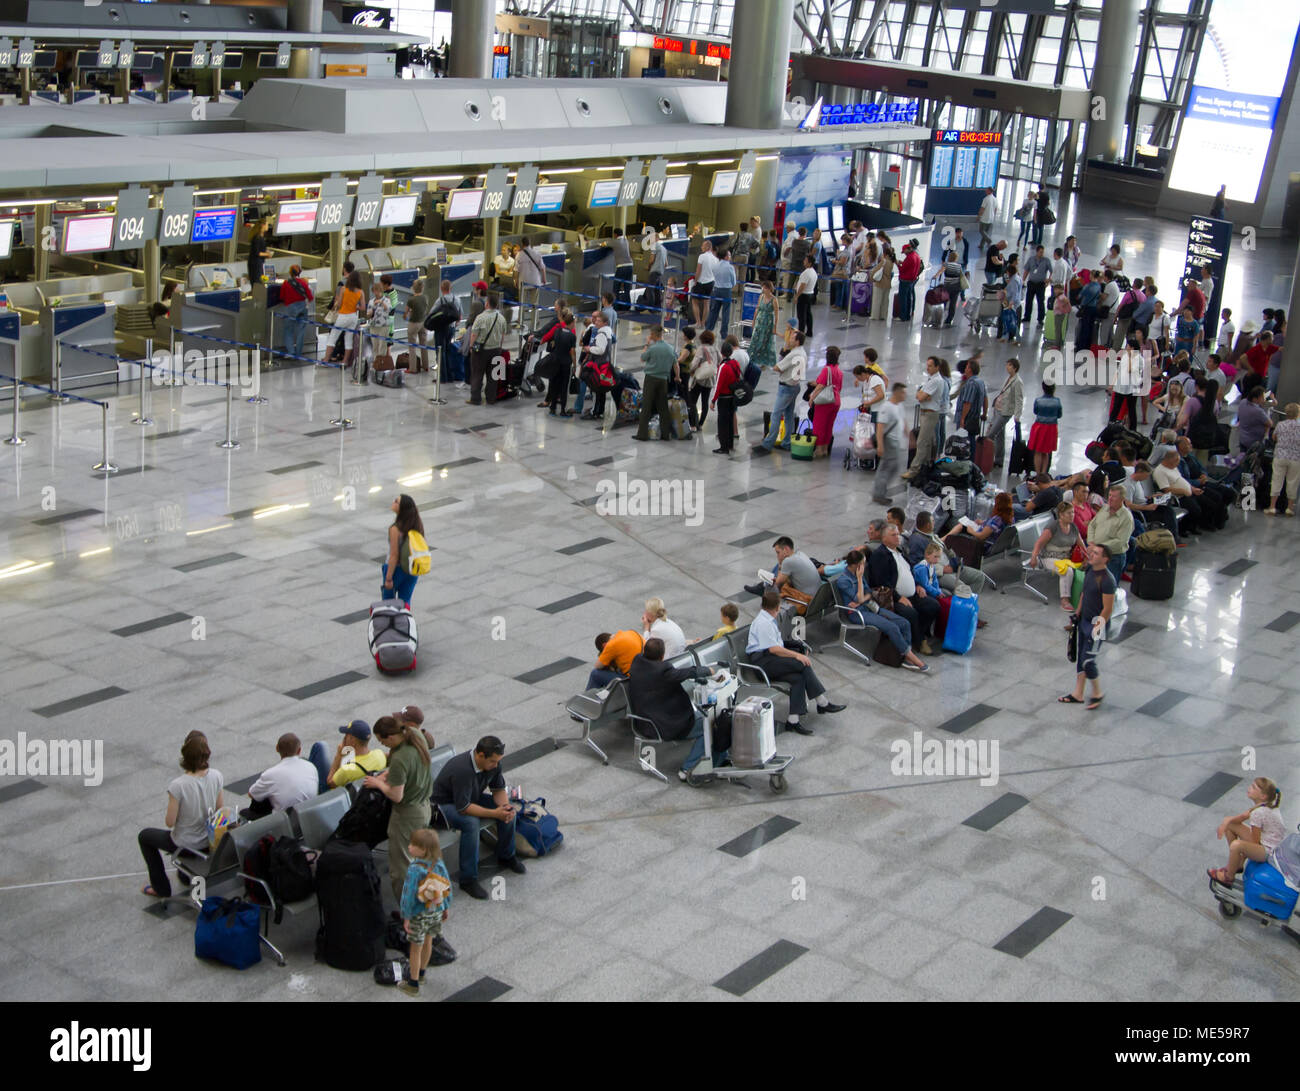 Moscow, Russia - June 16, 2013: Interior of Terminal A, Vnukovo Airport, Moscow Stock Photo